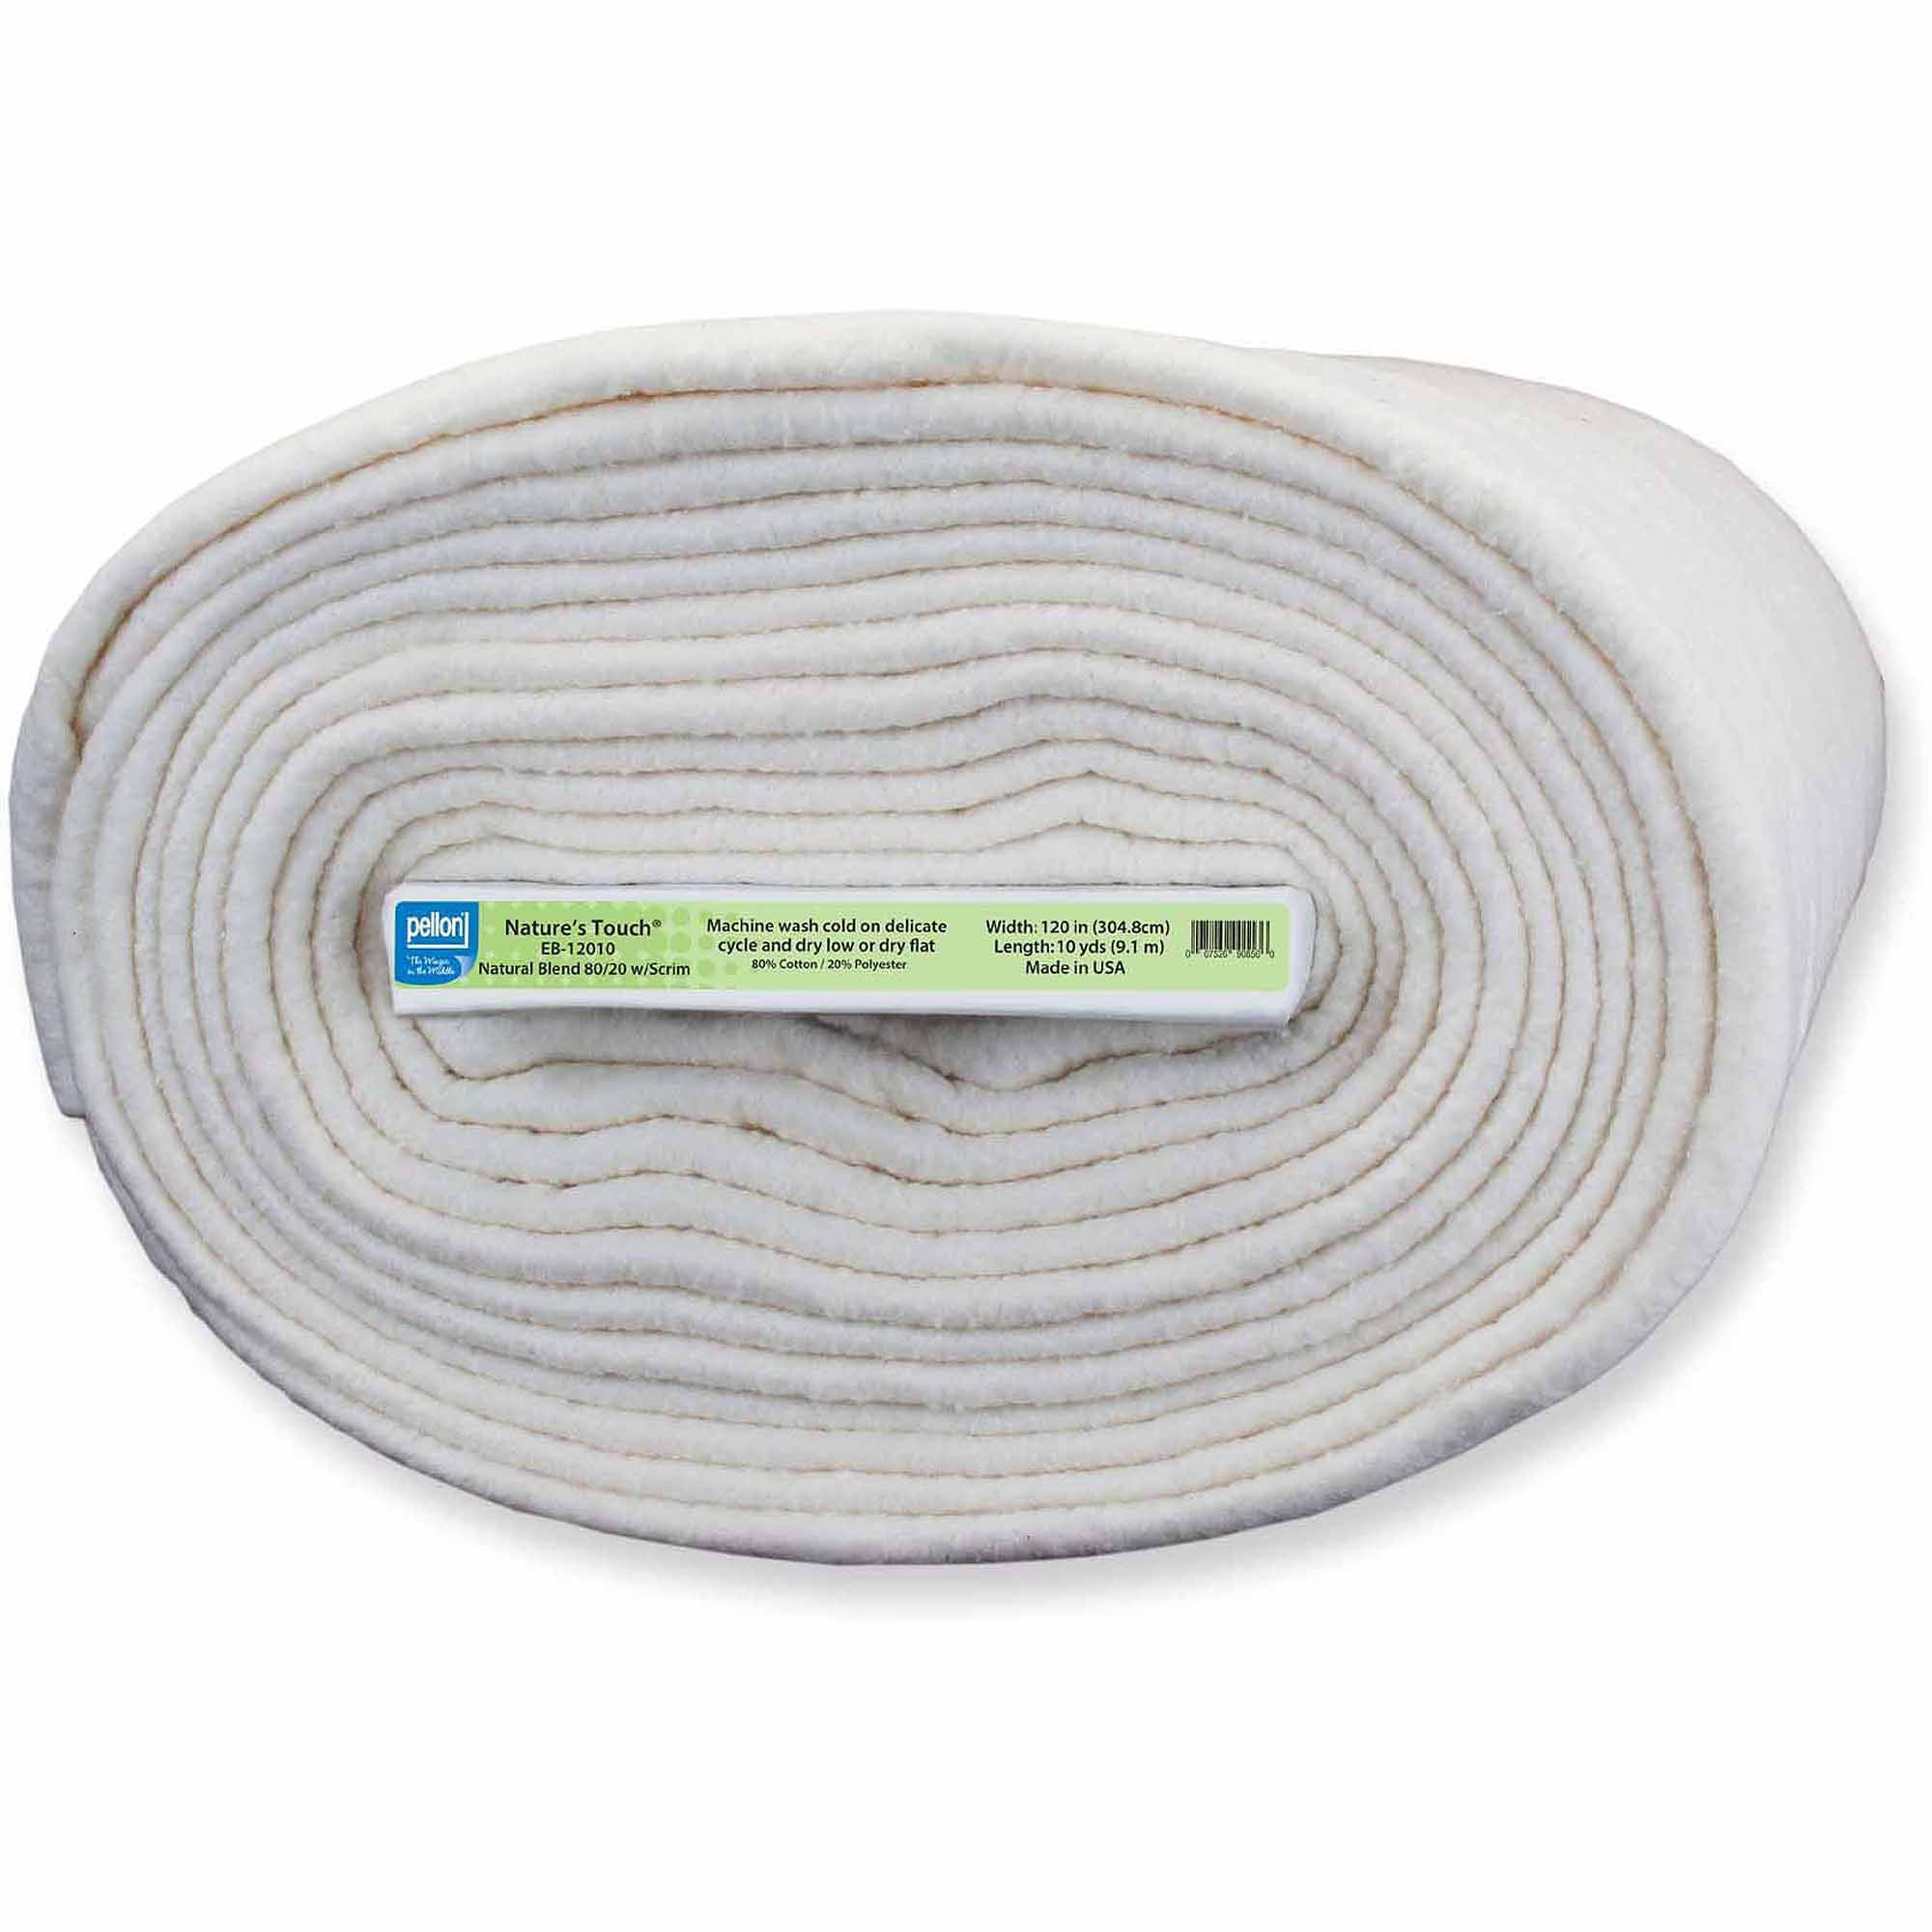 OQR Dream Bamboo Batting (Roll, Queen 93 in x 30 yds) shipping included*